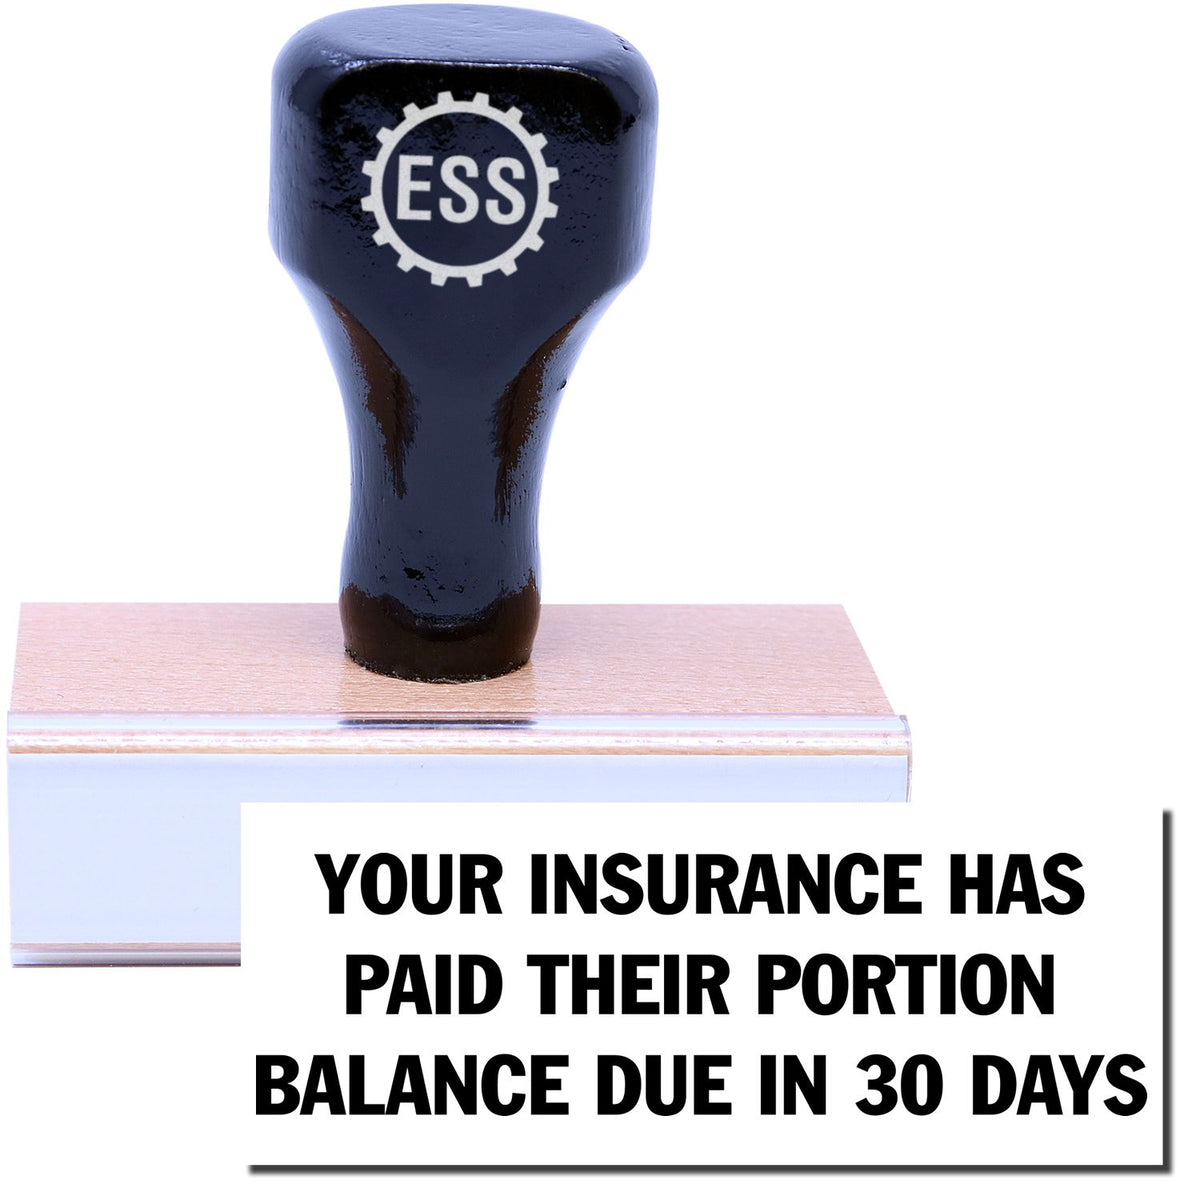 A stock office rubber stamp with a stamped image showing how the text &quot;YOUR INSURANCE HAS PAID THEIR PORTION&quot; and &quot;BALANCE DUE IN 30 DAYS&quot; in a large font is displayed after stamping.